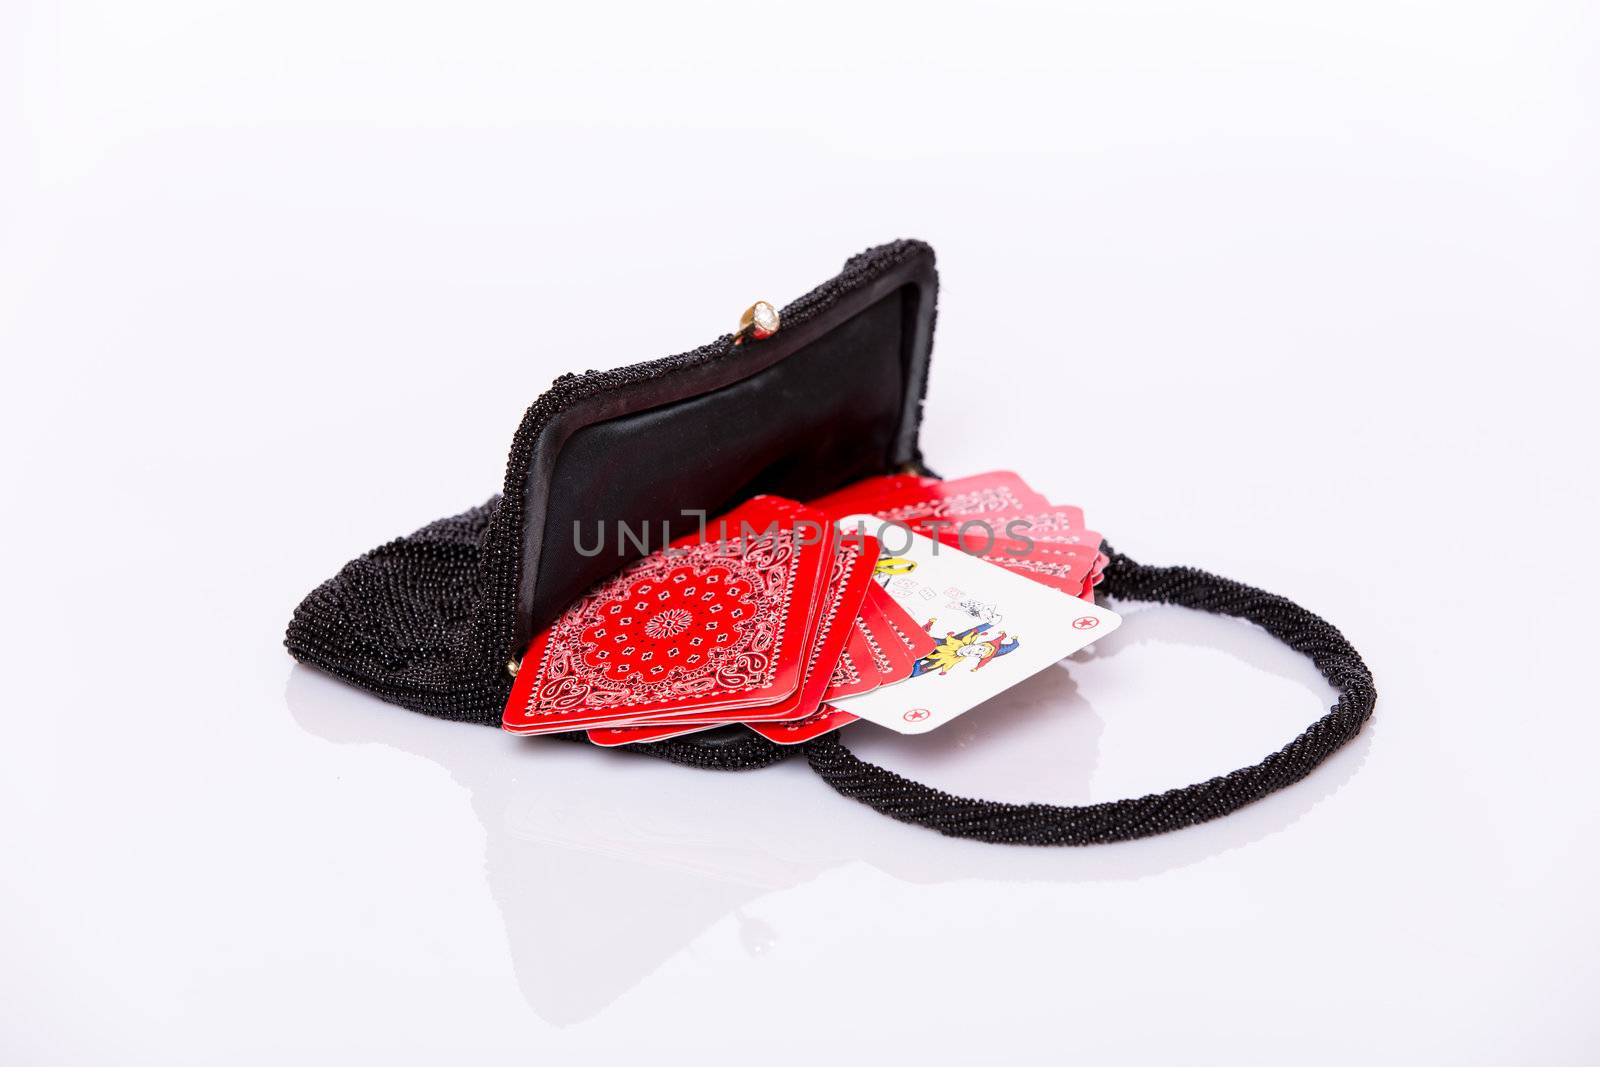 Small black lady handbag and red play cards